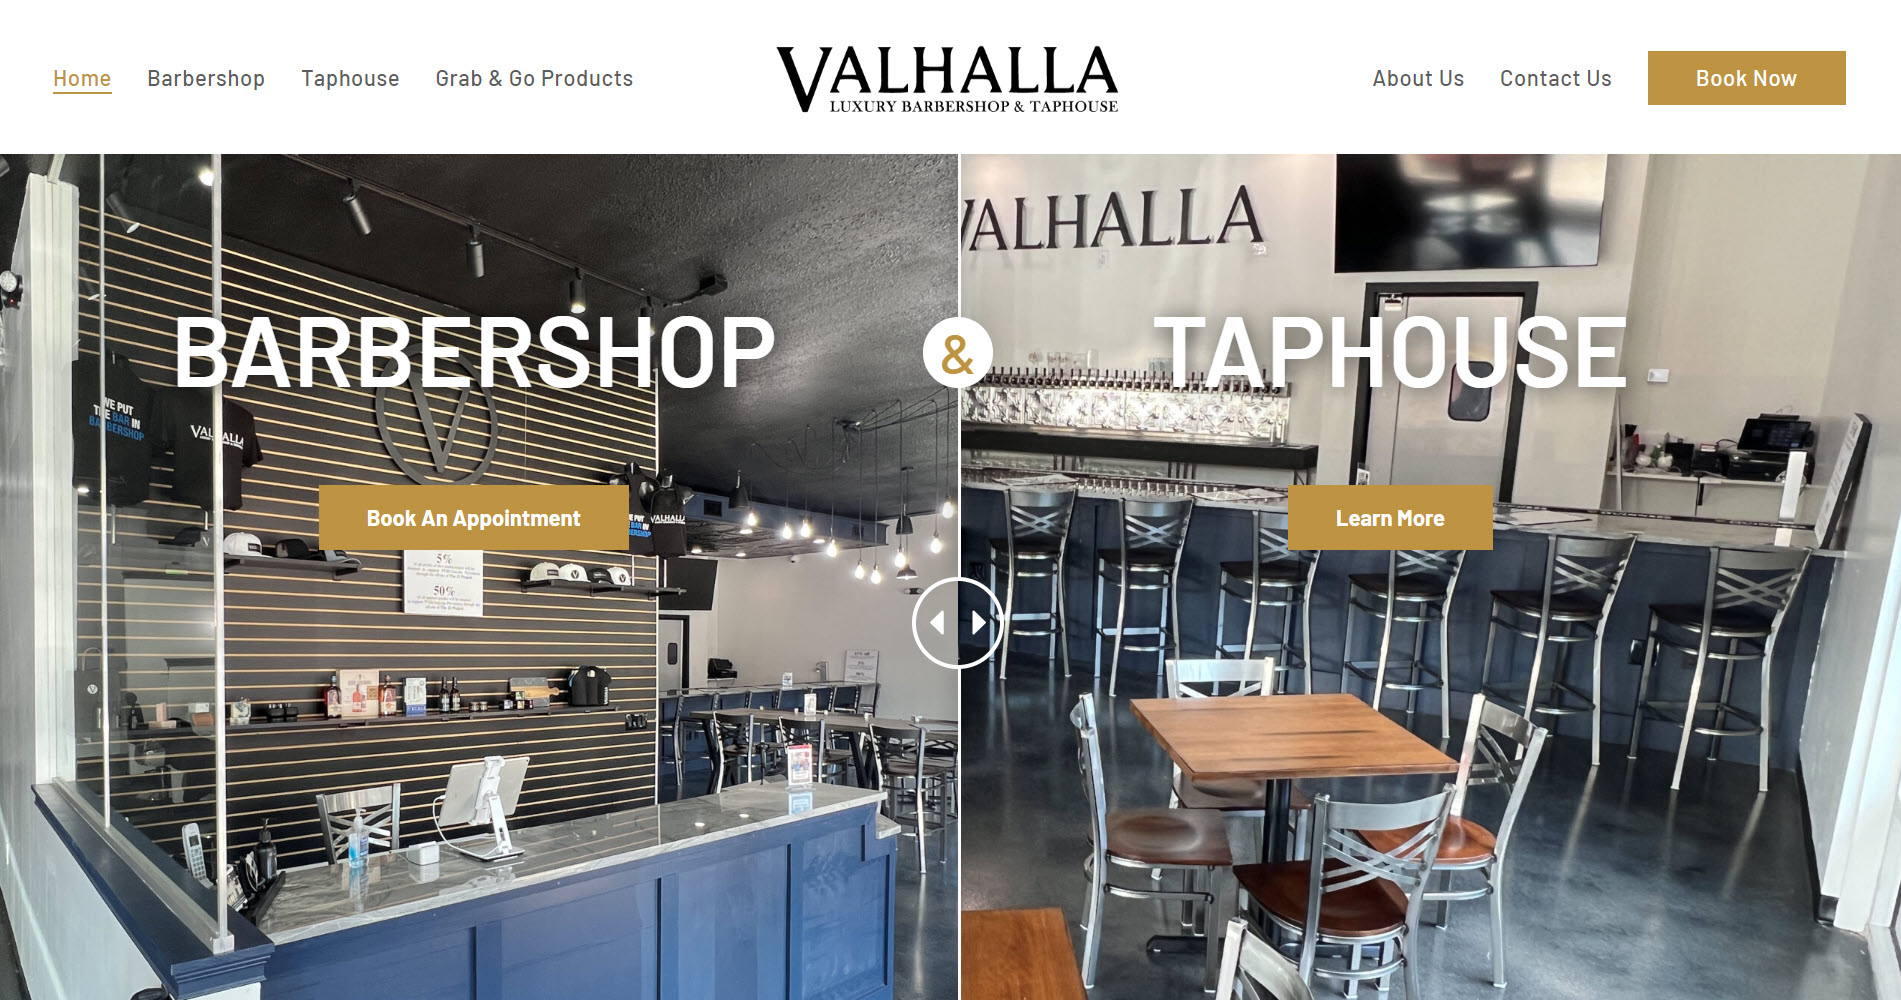 The Valhalla Barbershop & Taphouse